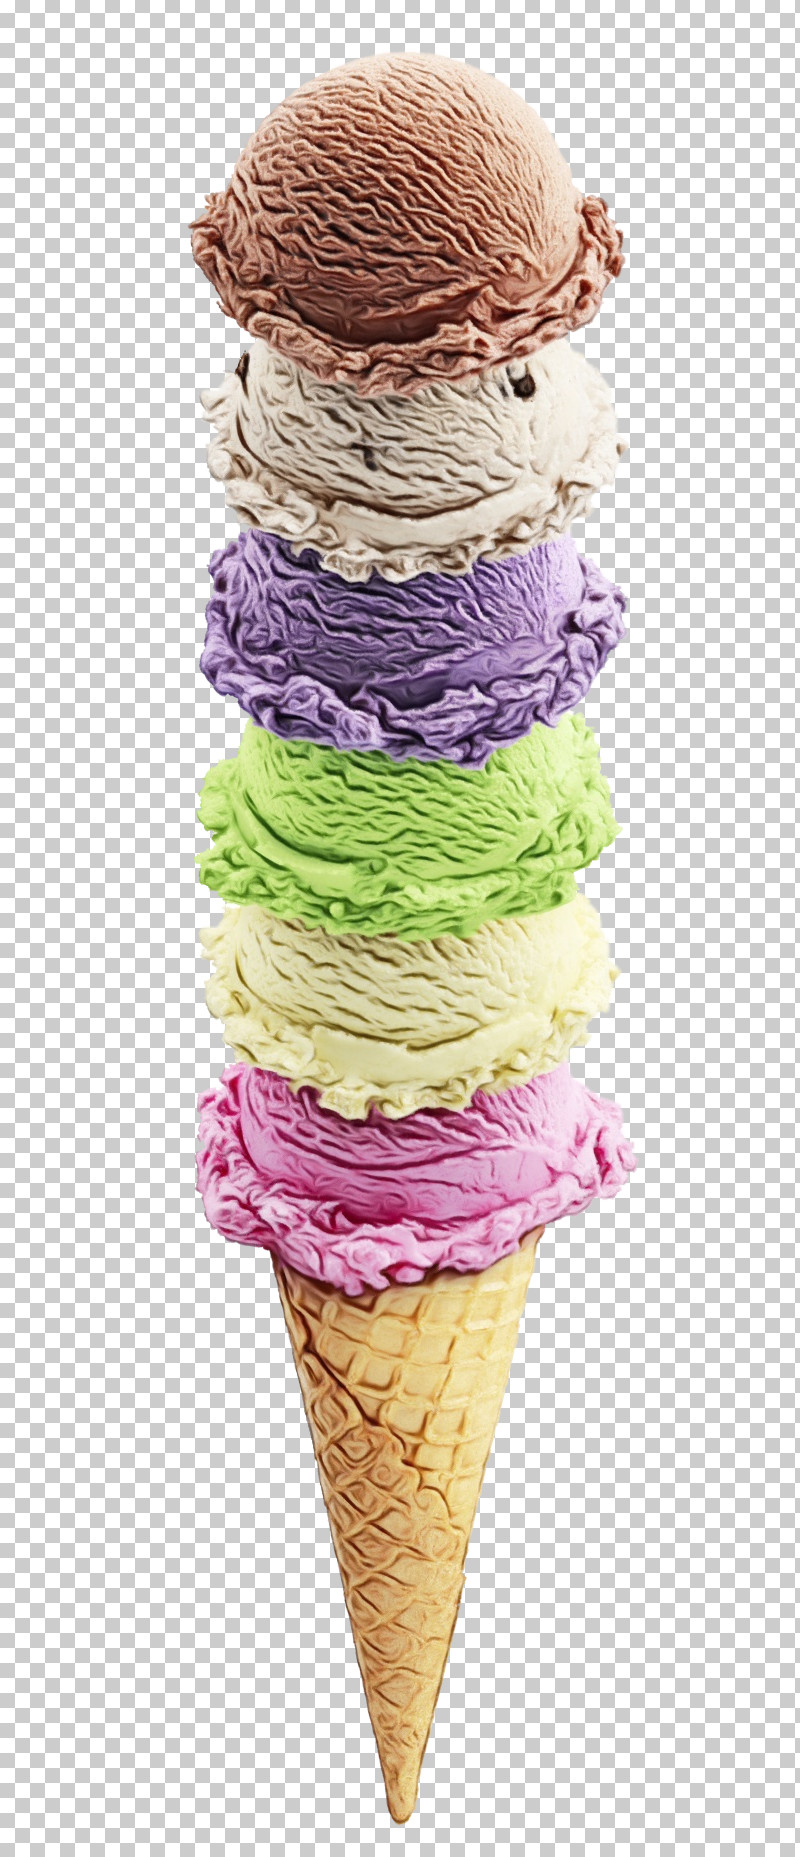 Ice Cream PNG, Clipart, Banan, Cone, Ice, Ice Cream, Ice Cream Cone Free PNG Download